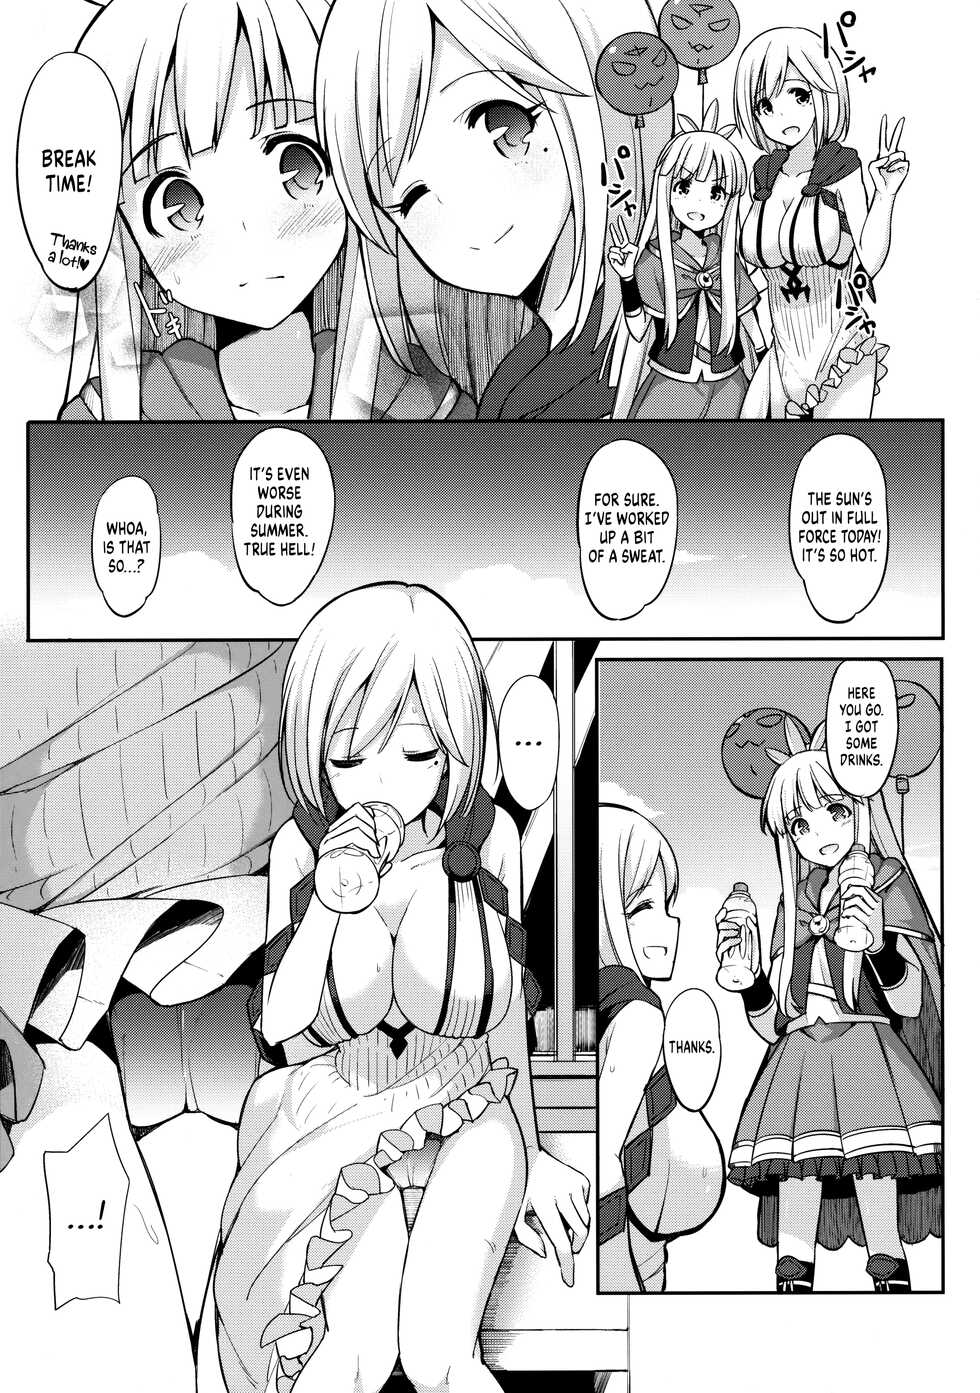 (SC2016 Winter) [H@BREAK (Itose Ikuto)] I Had a Cross Fate Episode at Comiket with an Onee-san I Met on Twitter and Spurted out Something Super Thick (Granblue Fantasy) [English] [head empty] - Page 4